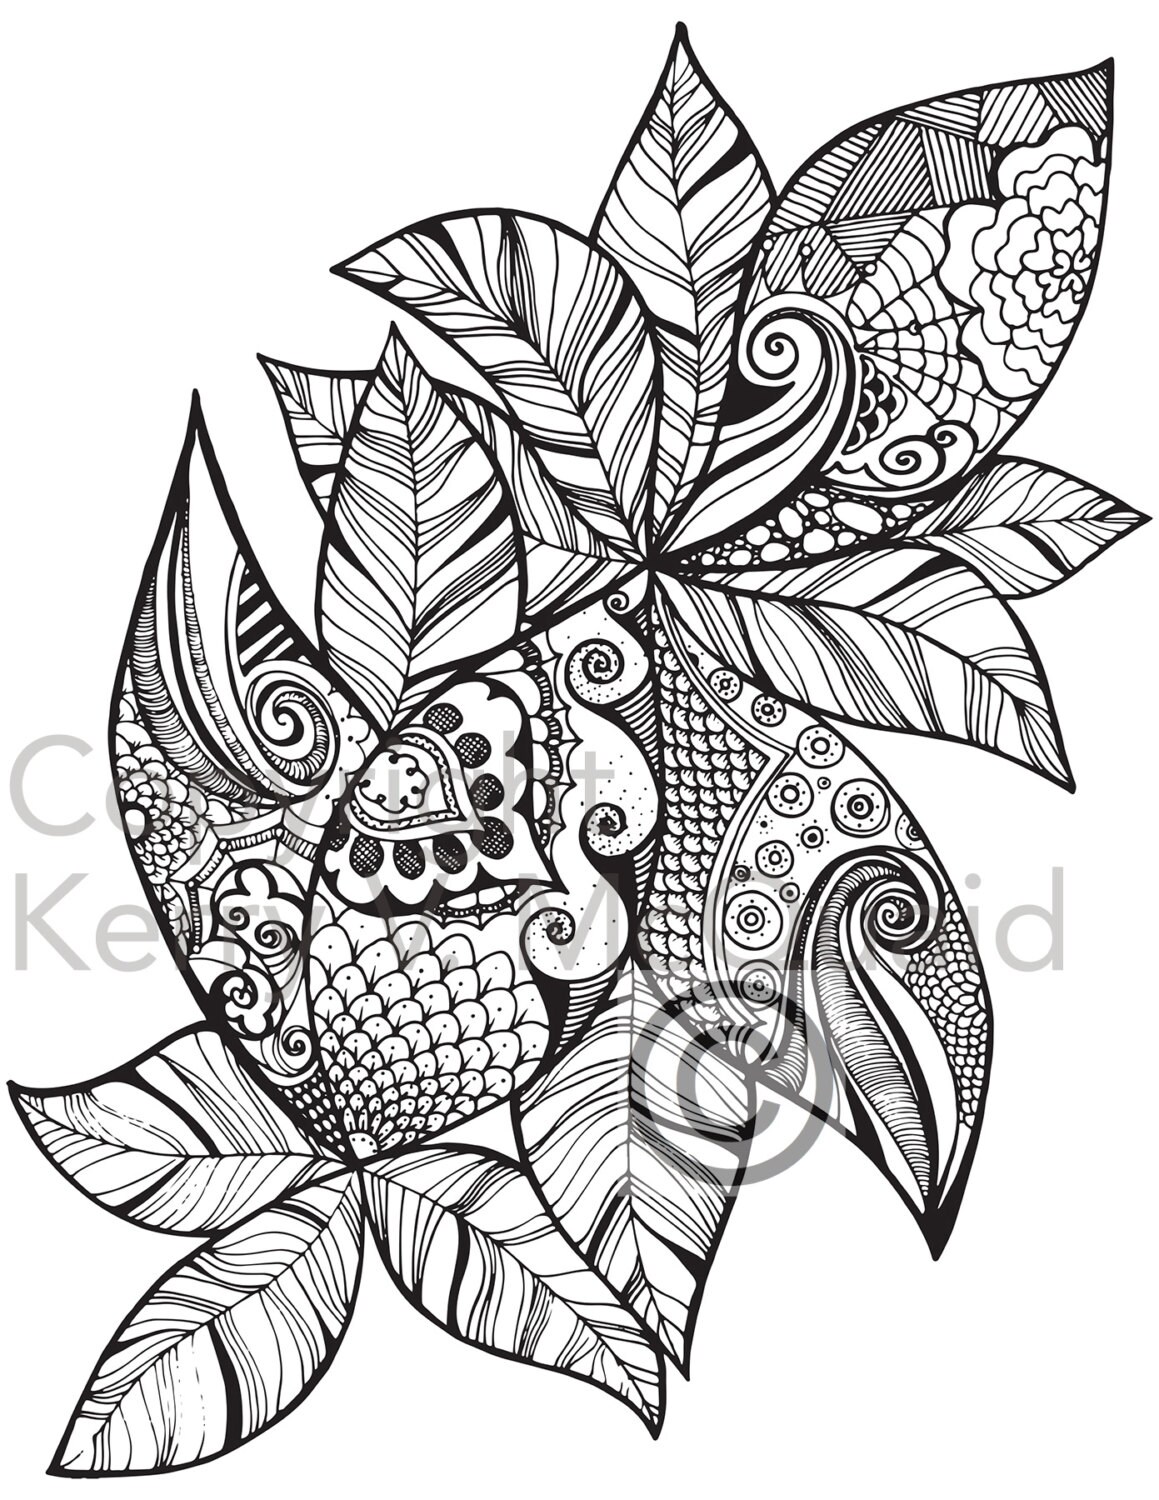 Instant PDF Download Coloring Page Hand Drawn Leaf Patterns | Etsy